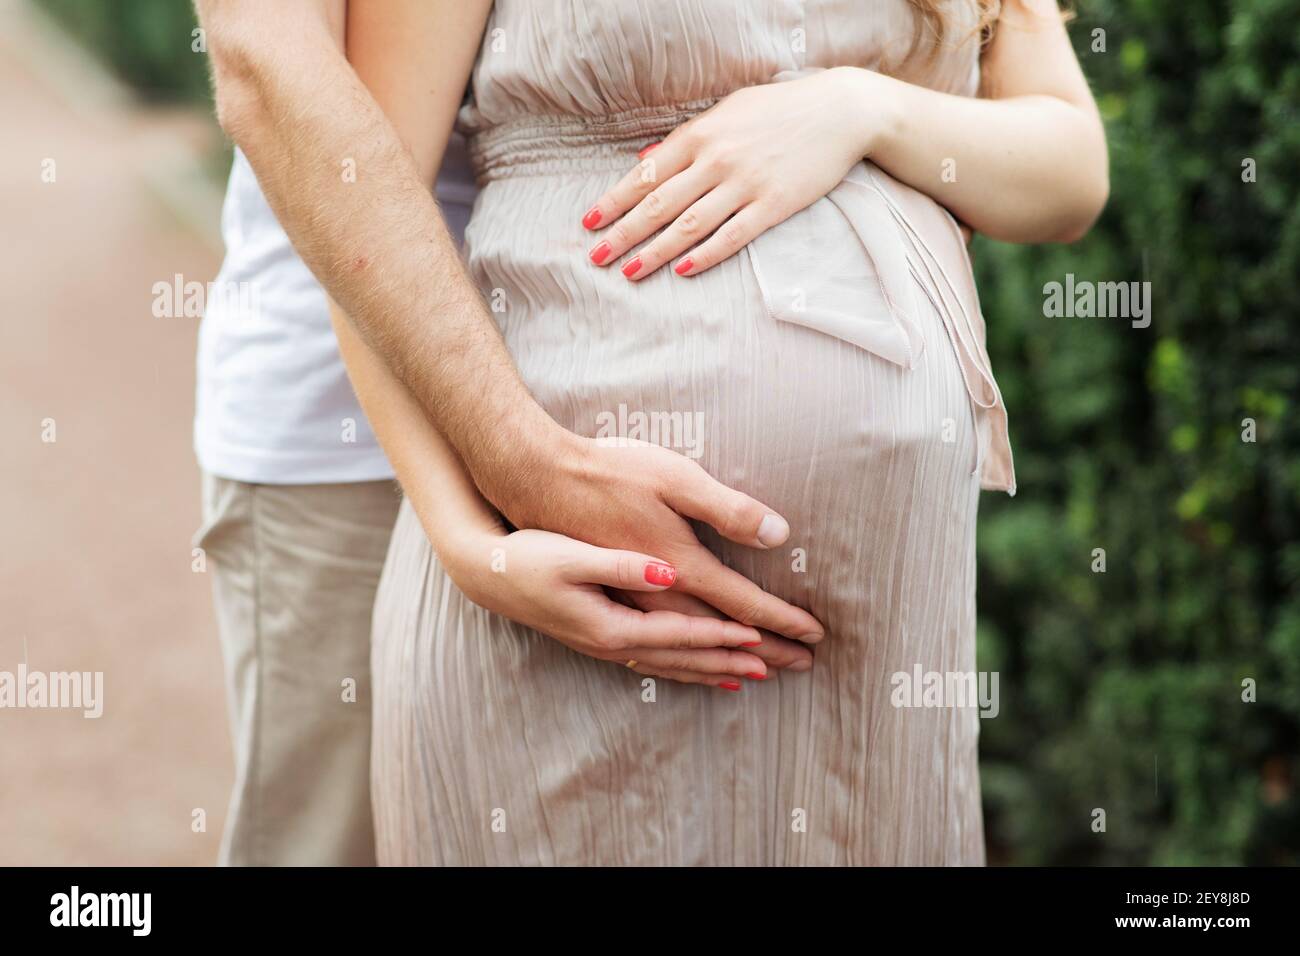 Man Hands Hug Pregnant Woman by Belly Closeup Photography. Staying Beautiful Pregnancy Girl Dressed in Dress. Future Parents and Childbirth Horizontal Stock Photo